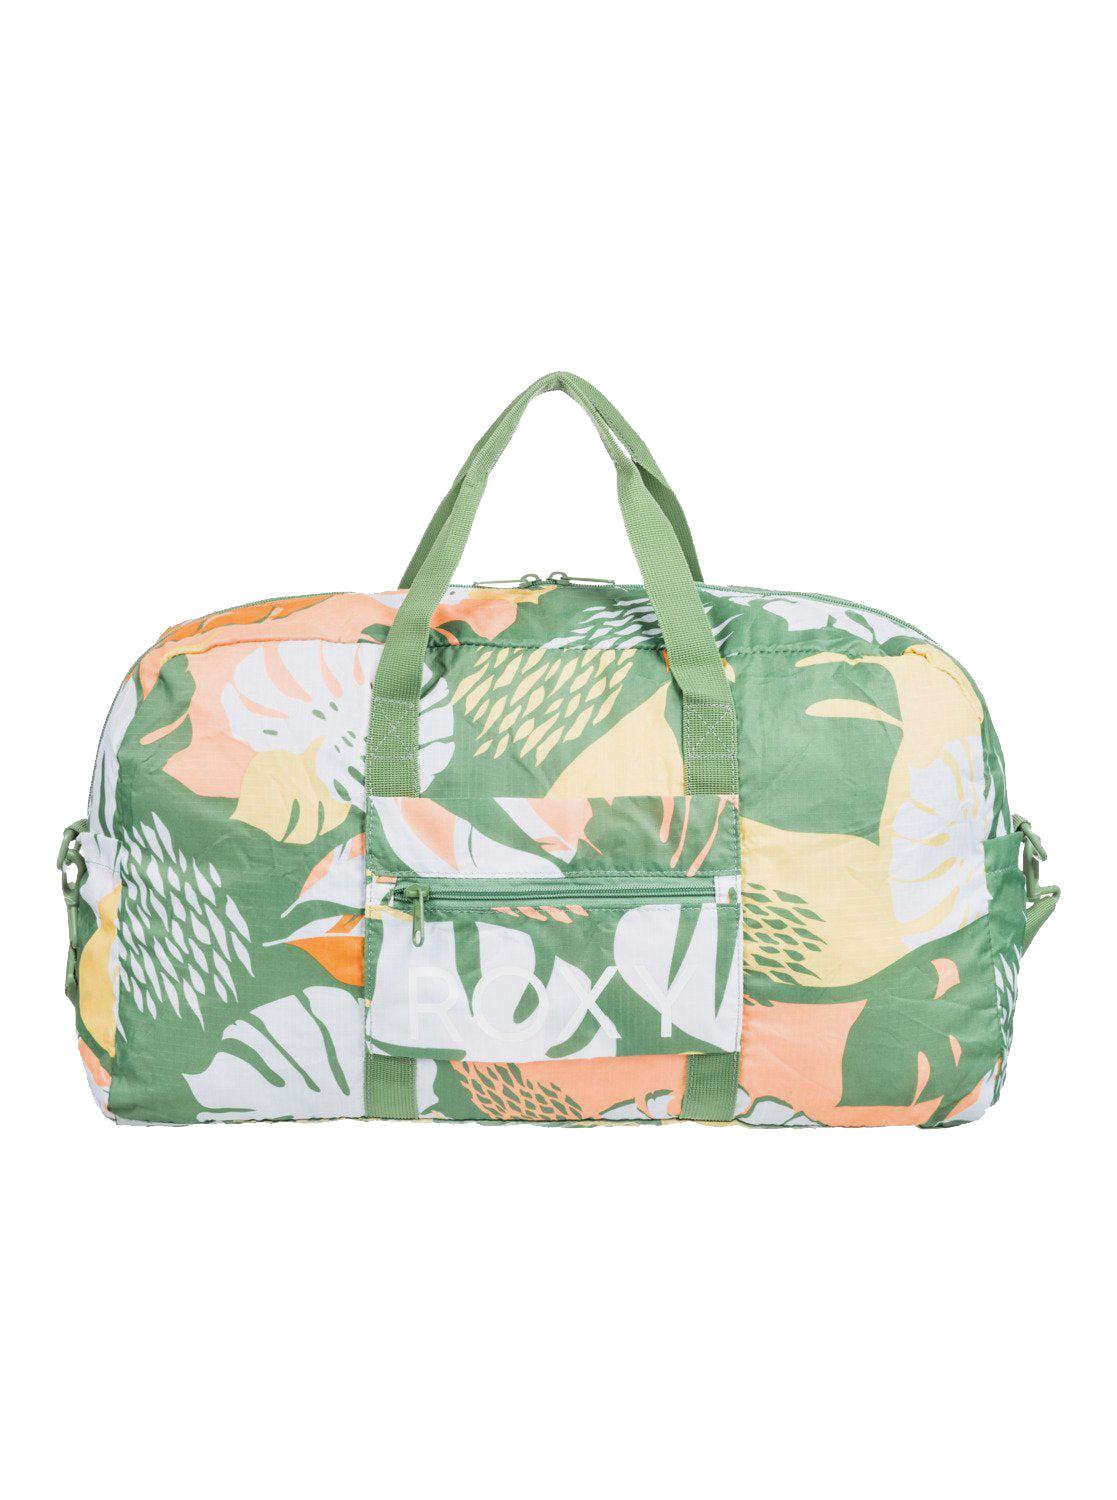 Roxy So Are You 26L Recycled Packable Duffle Bag